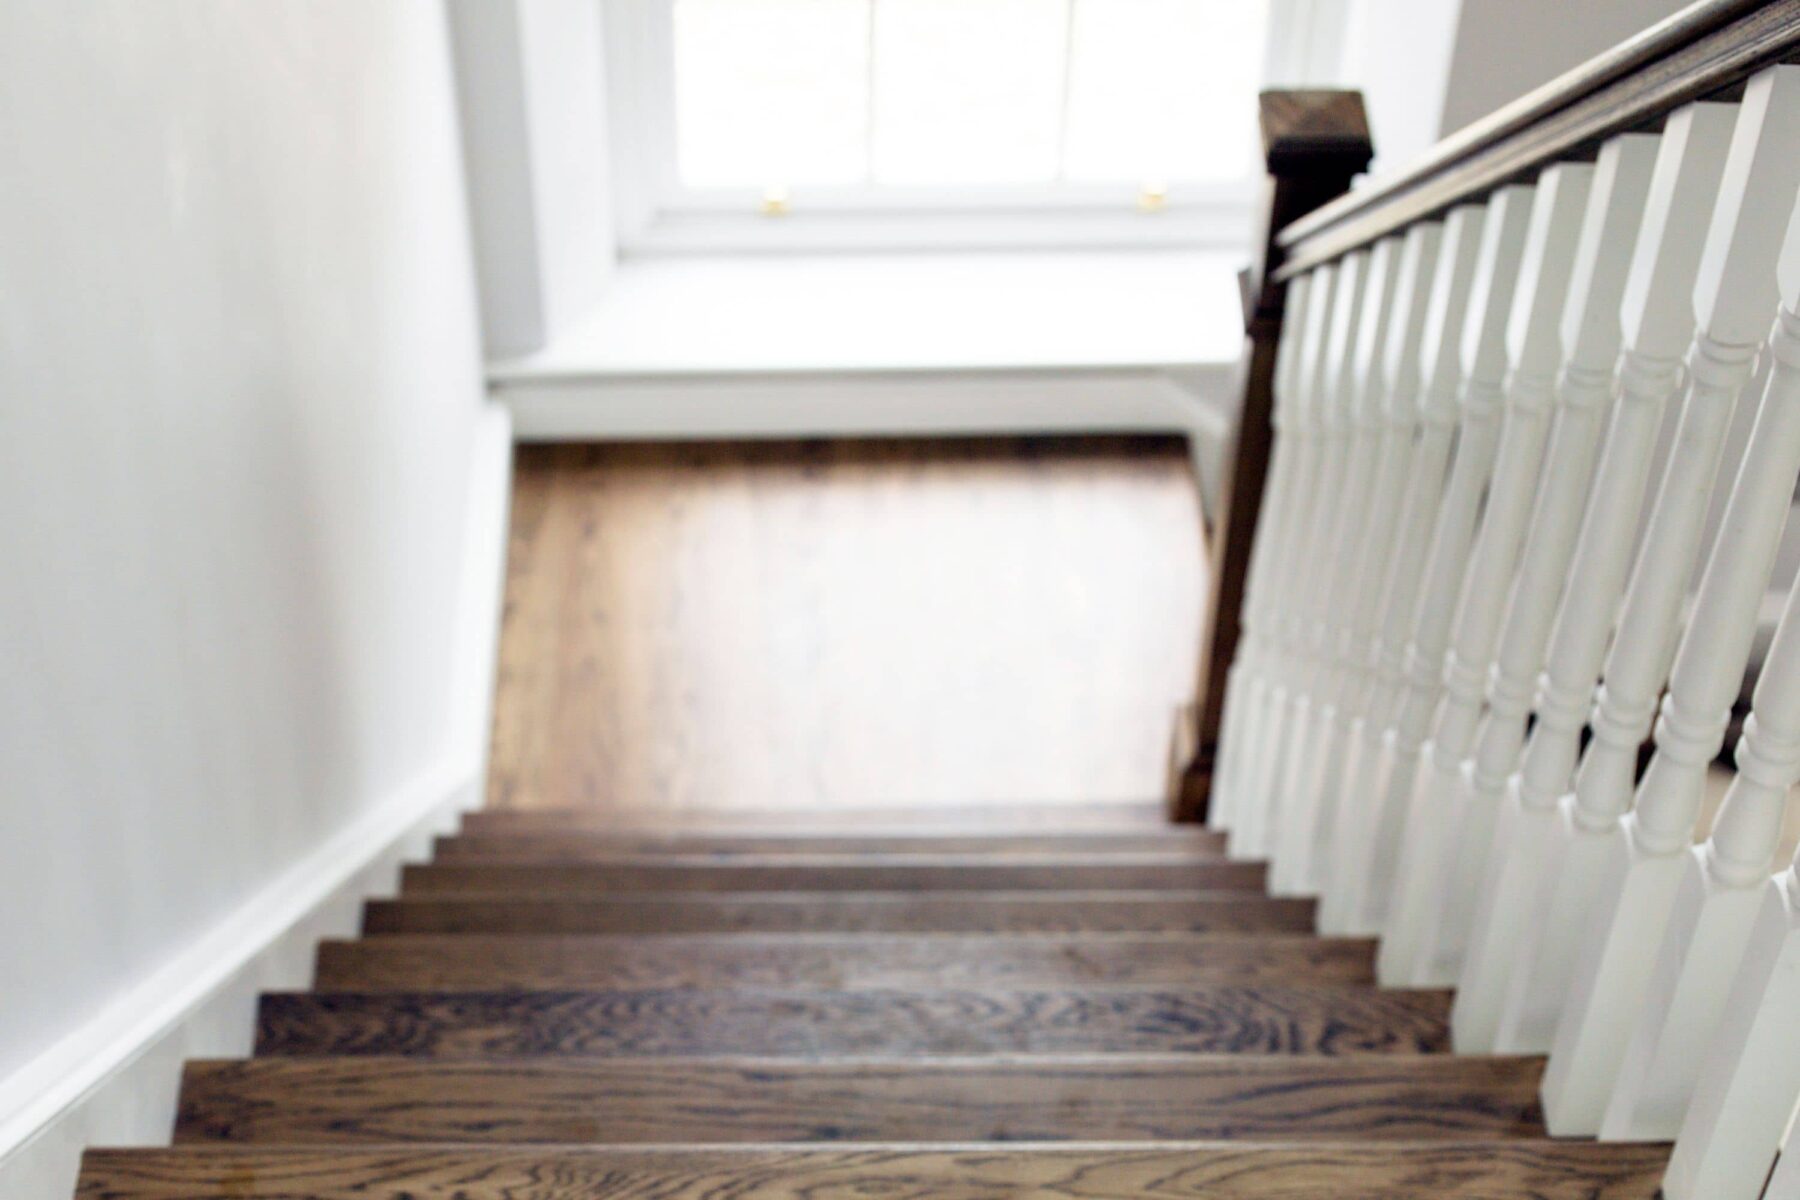 Oak stained staircase flooring in new build